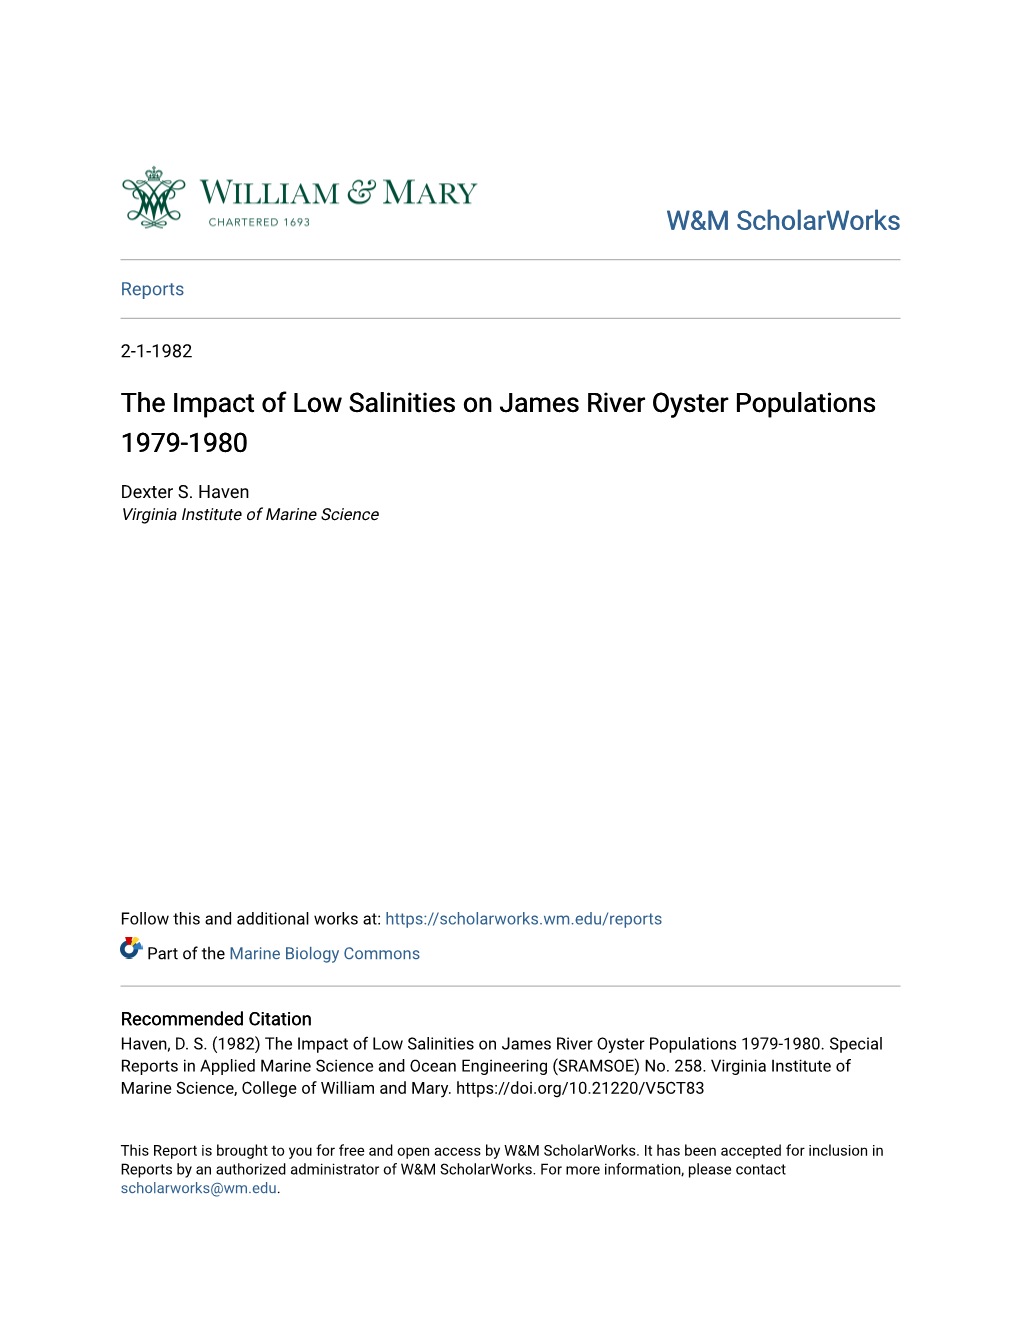 The Impact of Low Salinities on James River Oyster Populations 1979-1980